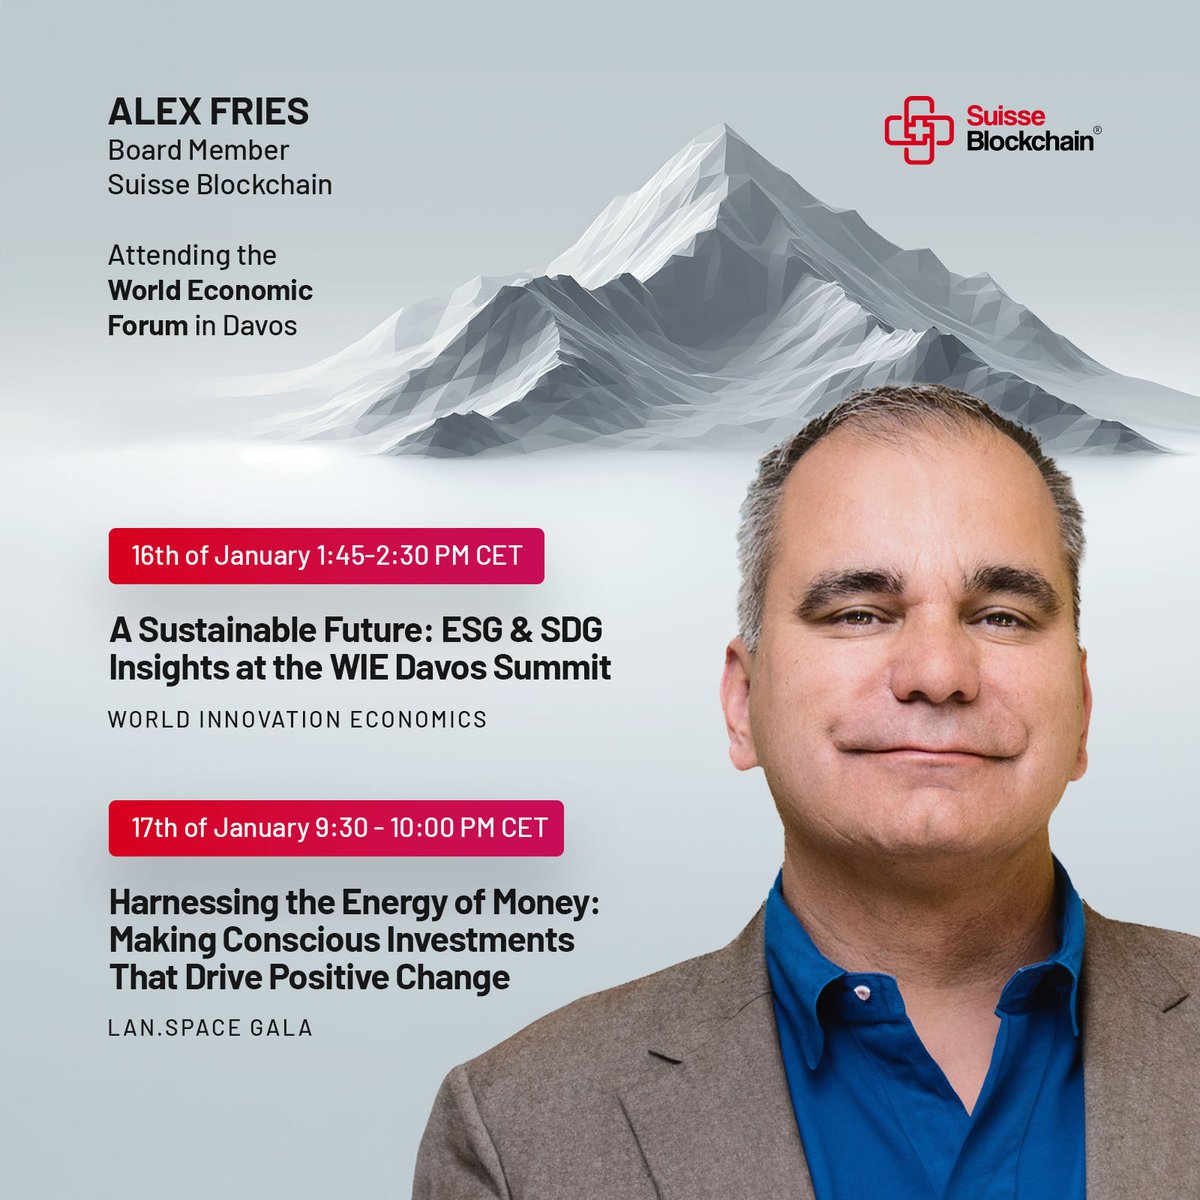 We're happy to announce that Alexander Fries, one of our board members, will be speaking at two significant panels taking place during the WEF. All details in the picture below 👇